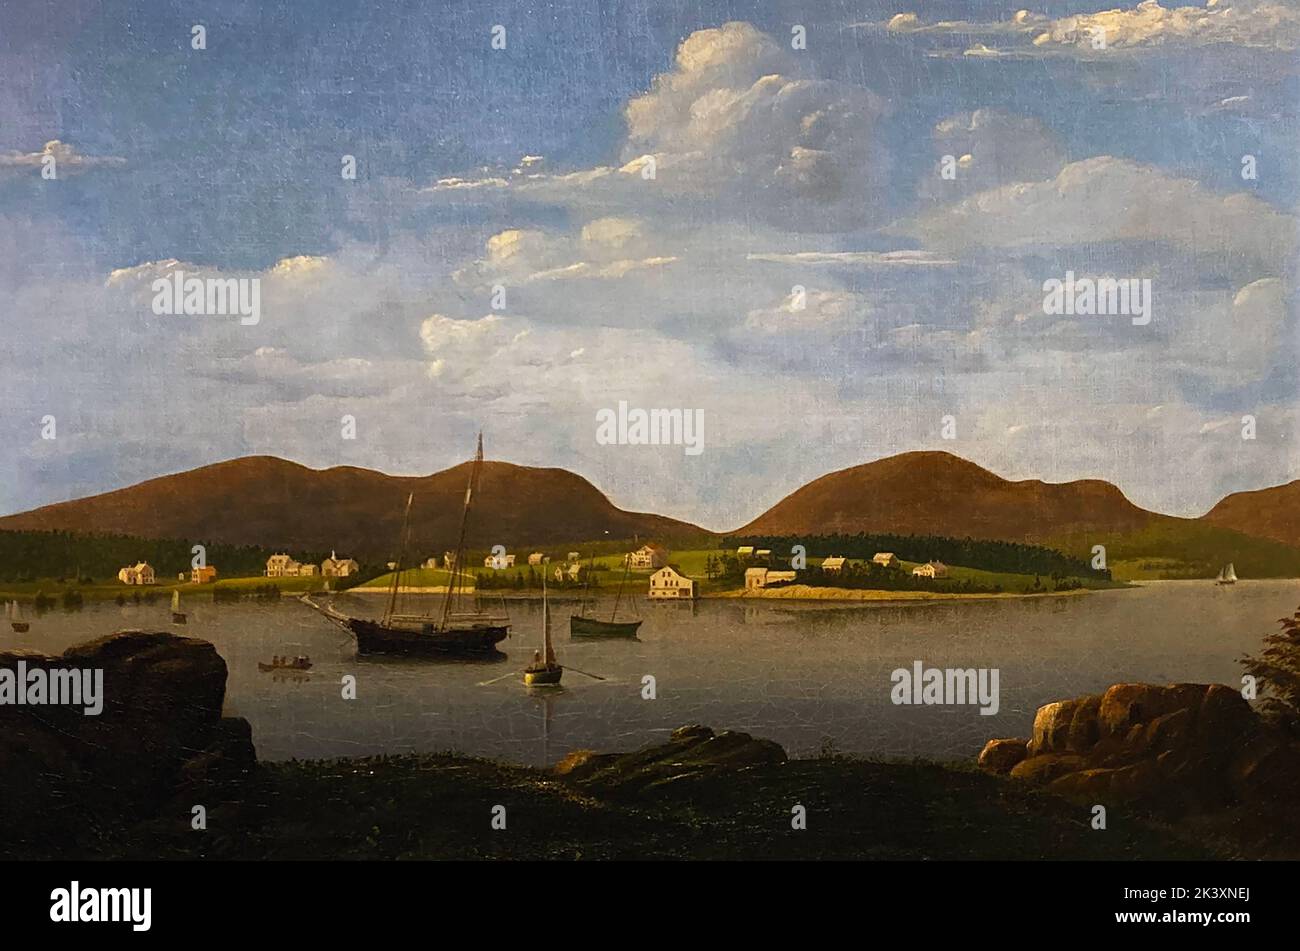 This painting by Fitz Henry Lane was done around 1850. The notes at the Farnsworth Museum in Rockland note 'Mary Mellen served as the artist’s apprentice, copying his works as exercises, and eventually working with Lane on canvases based on earlier paintings, including this view of the town on Mount Dessert, which Lane visited with his friend, Joseph Stevens, Jr.' Fitz Henry Lane (1804 – 1865) was an American painter and printmaker of a style that would later be called Luminism. Stock Photo